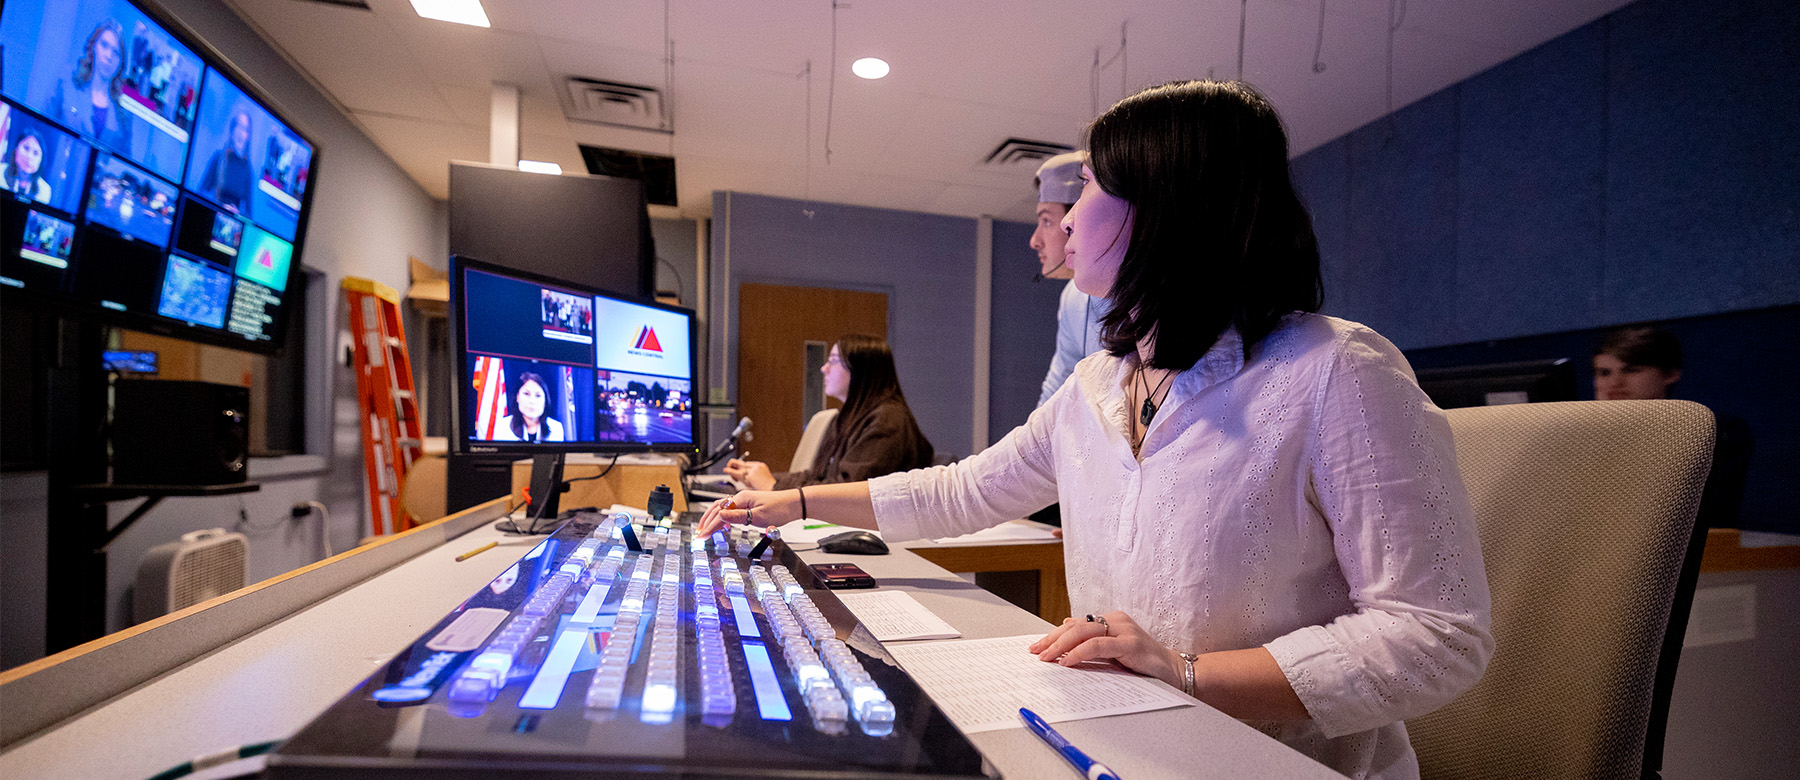 A student sits in a news studio in front of a sound board and a screen displaying multiple camera angles.